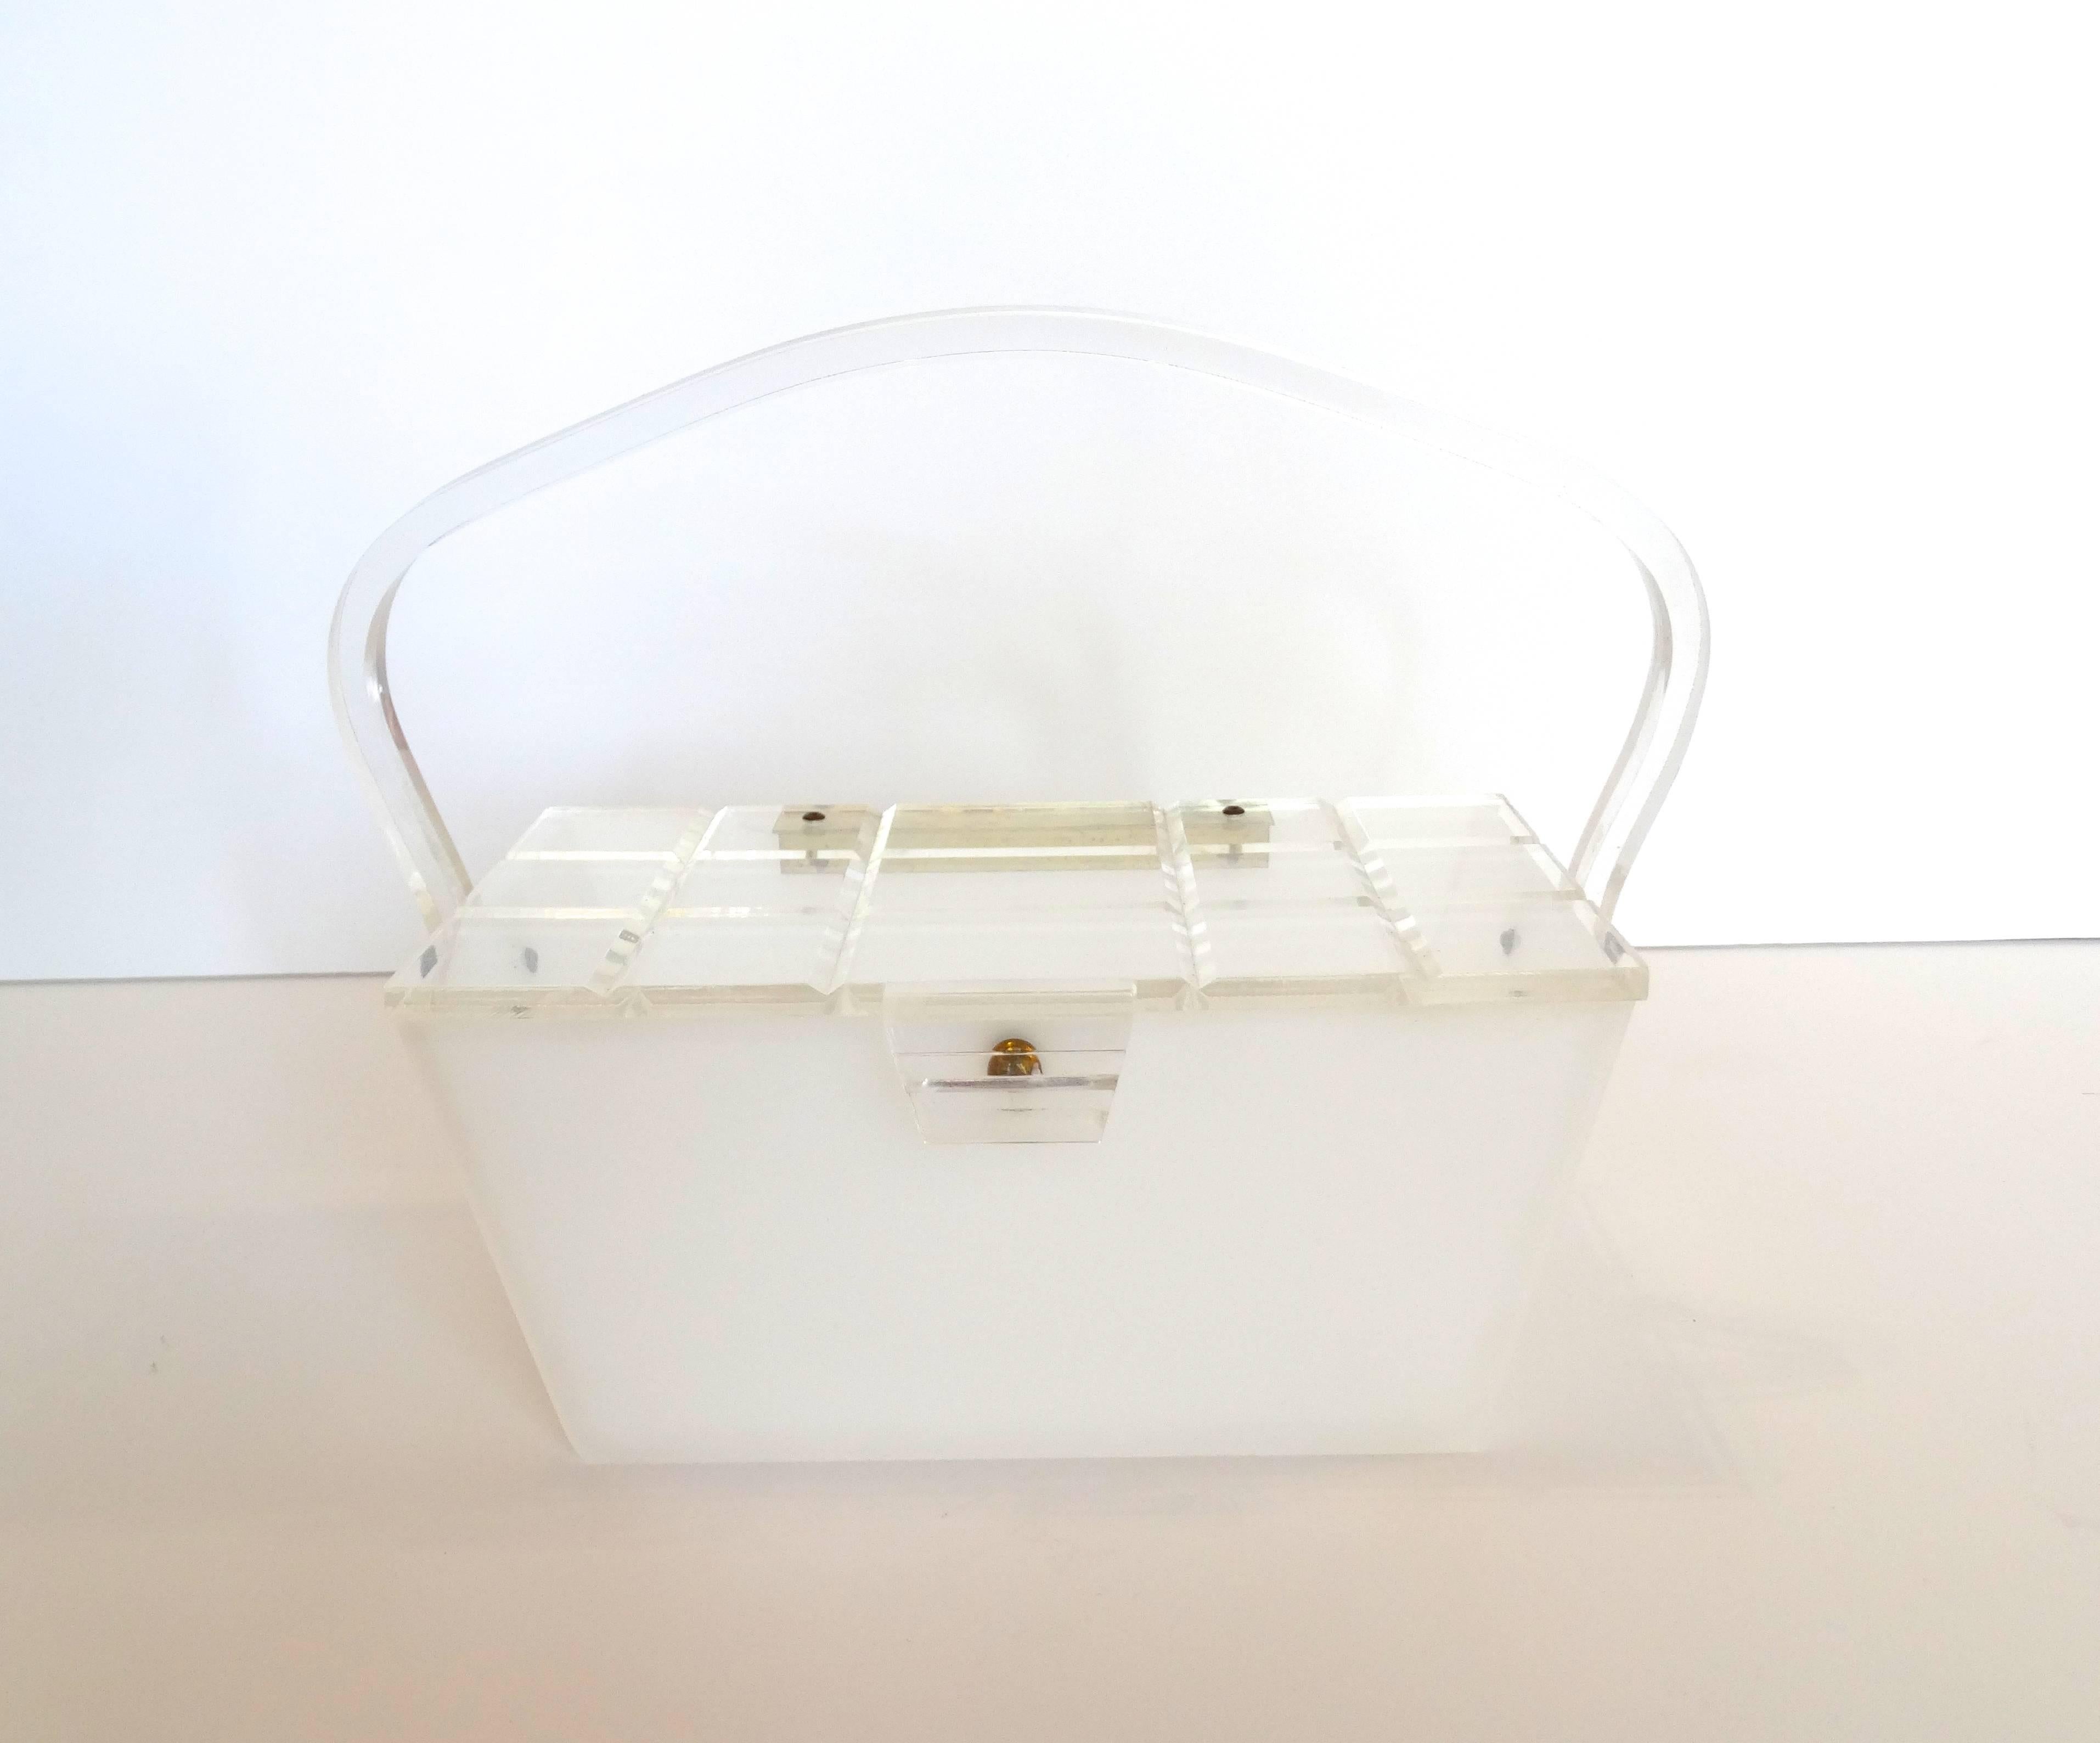 Fabulous geometric lucite purse from the 1960s. Milky, semi translucent lucite accented with gold hardware. Trapezoid shaped structure with top handle that can be folded over. Carved, grid like clear panel on the top, snaps into place. 


Width: